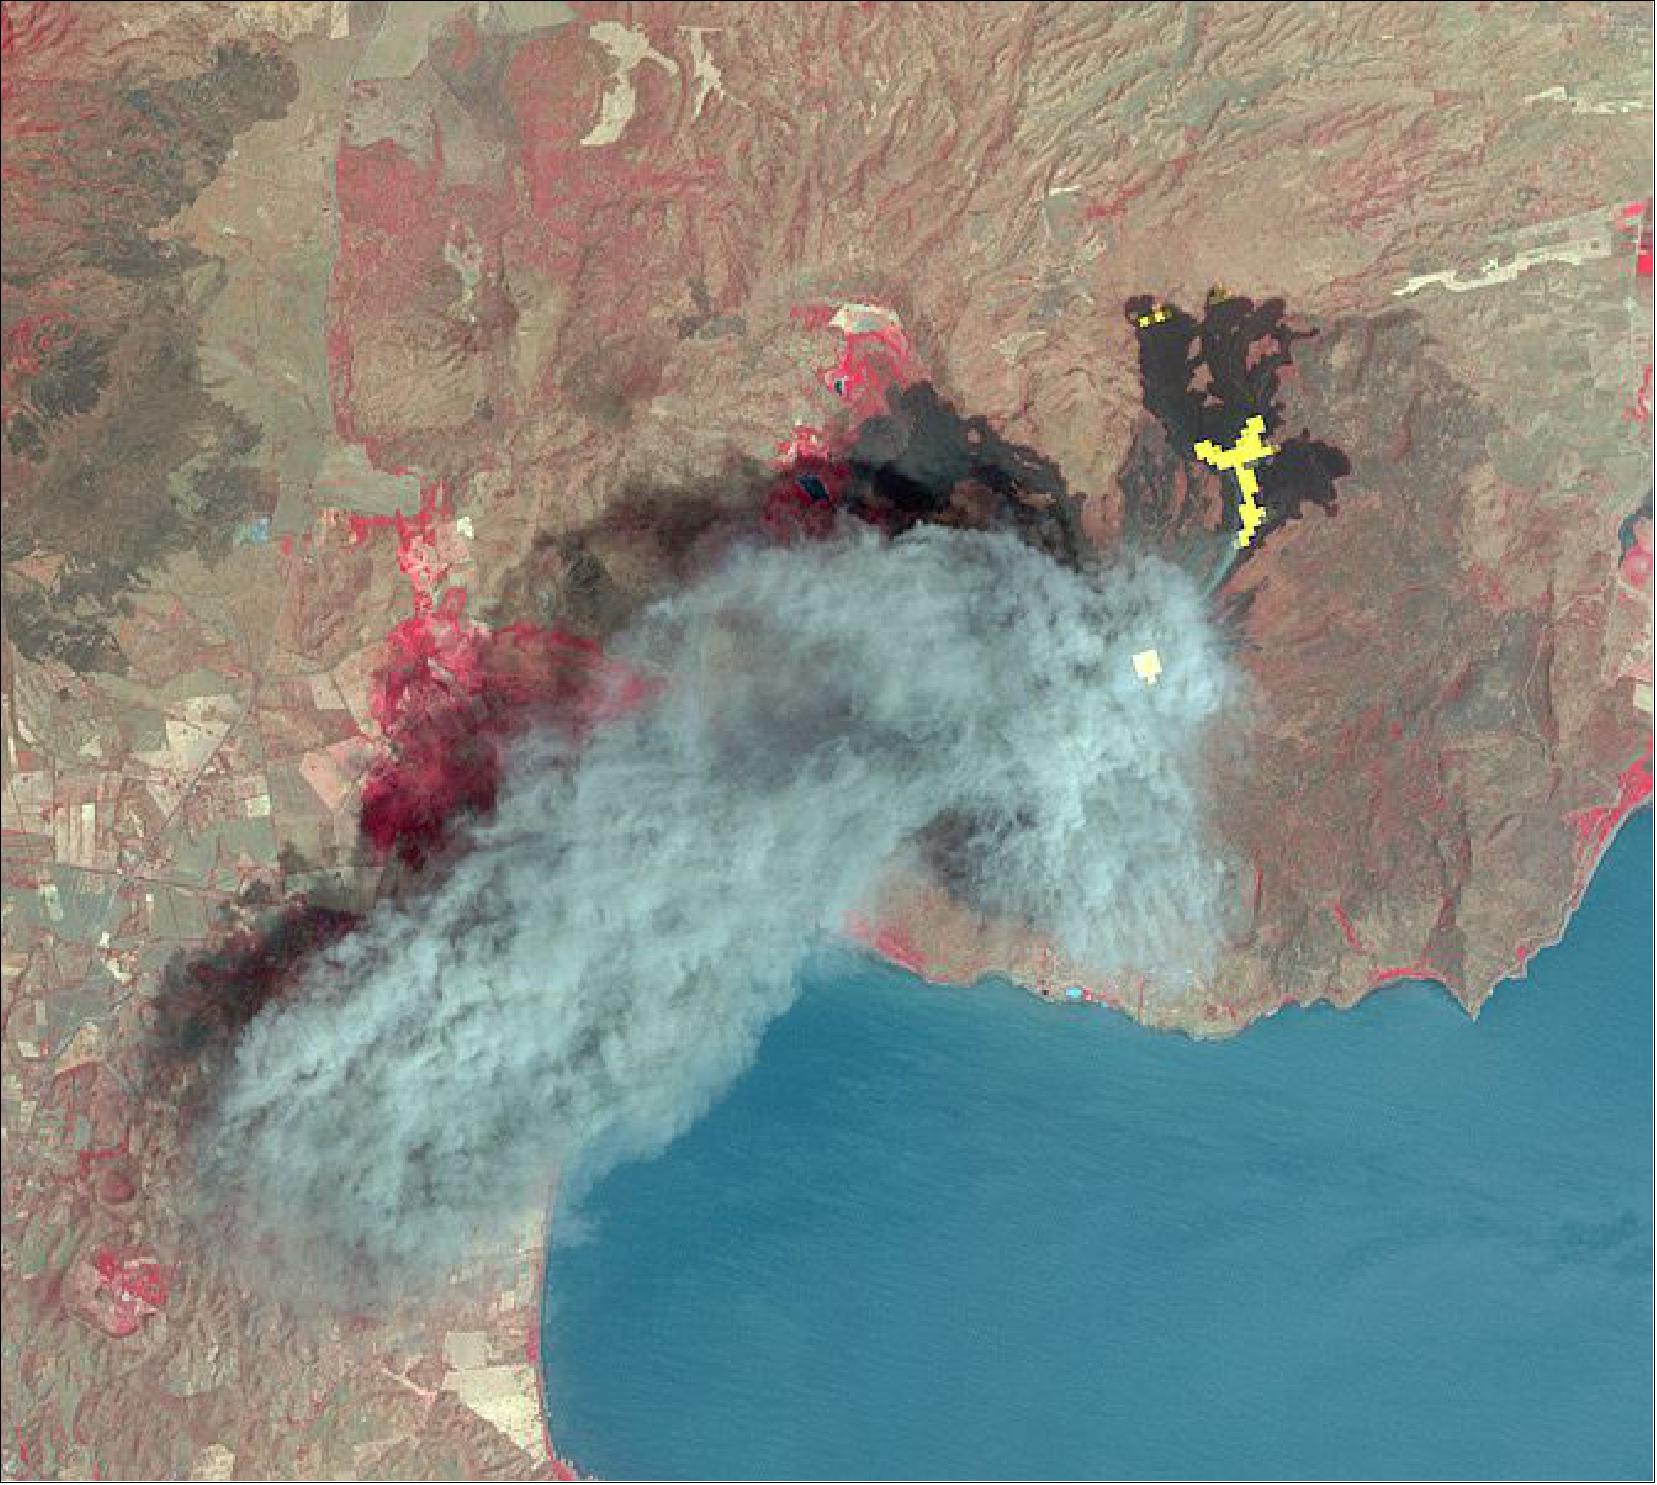 Figure 89: In Dec. 2015, one of Nicaragua's largest volcanoes, Momotombo, erupted for the first time since 1905. Continued activity at the end of February and into March 2016 produced large ash columns and pyroclastic (superheated ash-and-block) flows. On March 2, 2016, ASTER captured the volcano's eruptive activity during the day with its visible bands, and the previous night with its thermal infrared bands. The composite image shows a large blue-gray ash cloud covering the volcano's summit. The superimposed night data show the hot flows (in yellow) on the northeast flank, and the active summit crater in white. The data cover an area of 17 km x 18 km, located at 12.7º north, 86.6º west. 65)